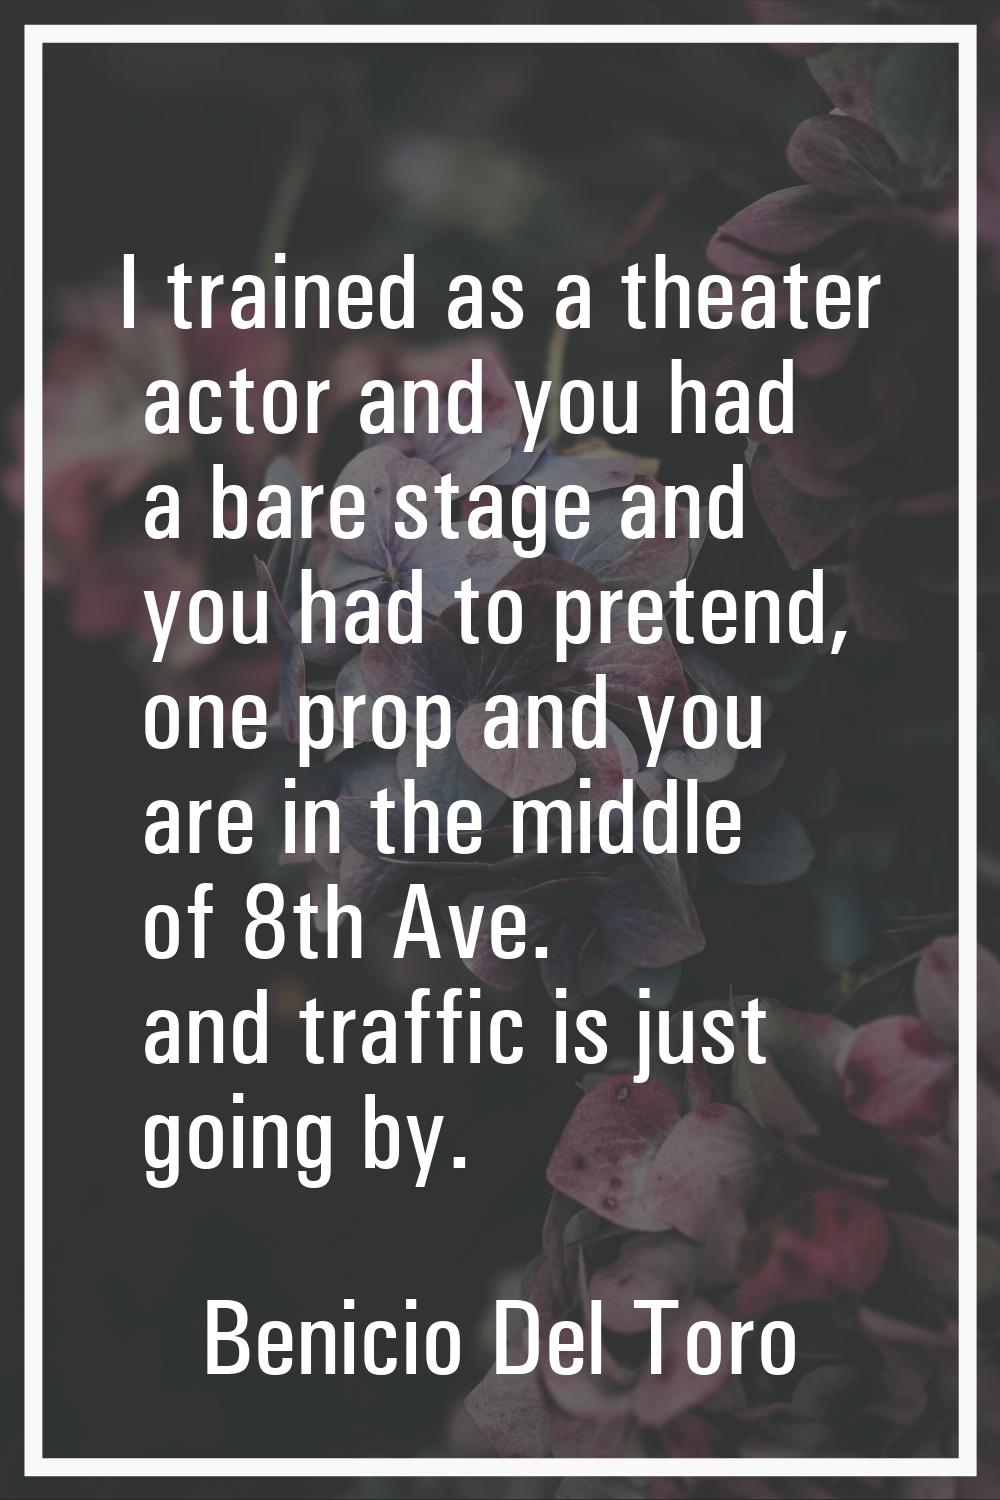 I trained as a theater actor and you had a bare stage and you had to pretend, one prop and you are 